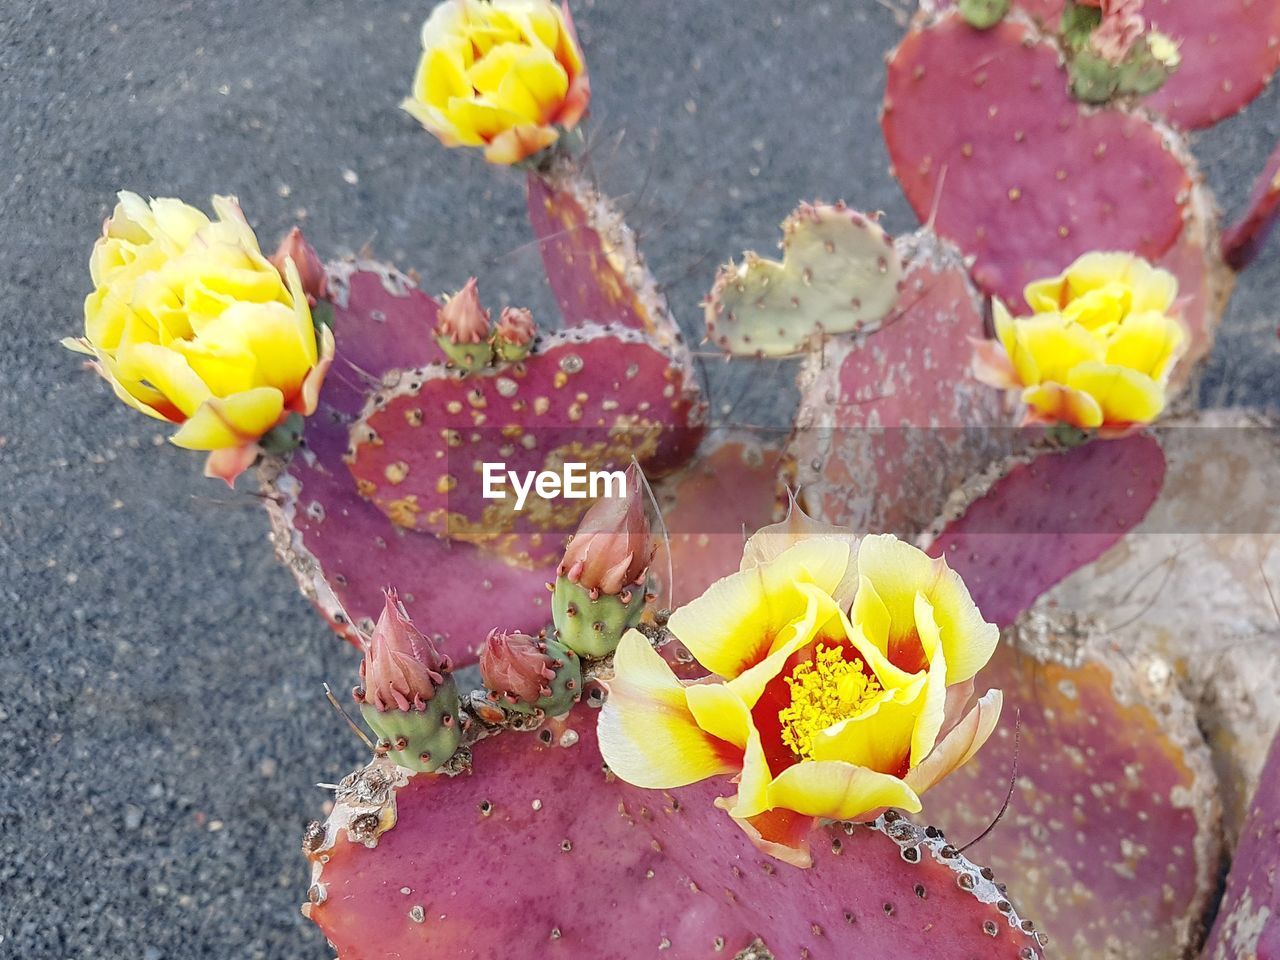 HIGH ANGLE VIEW OF YELLOW FLOWERING PLANT ON CACTUS